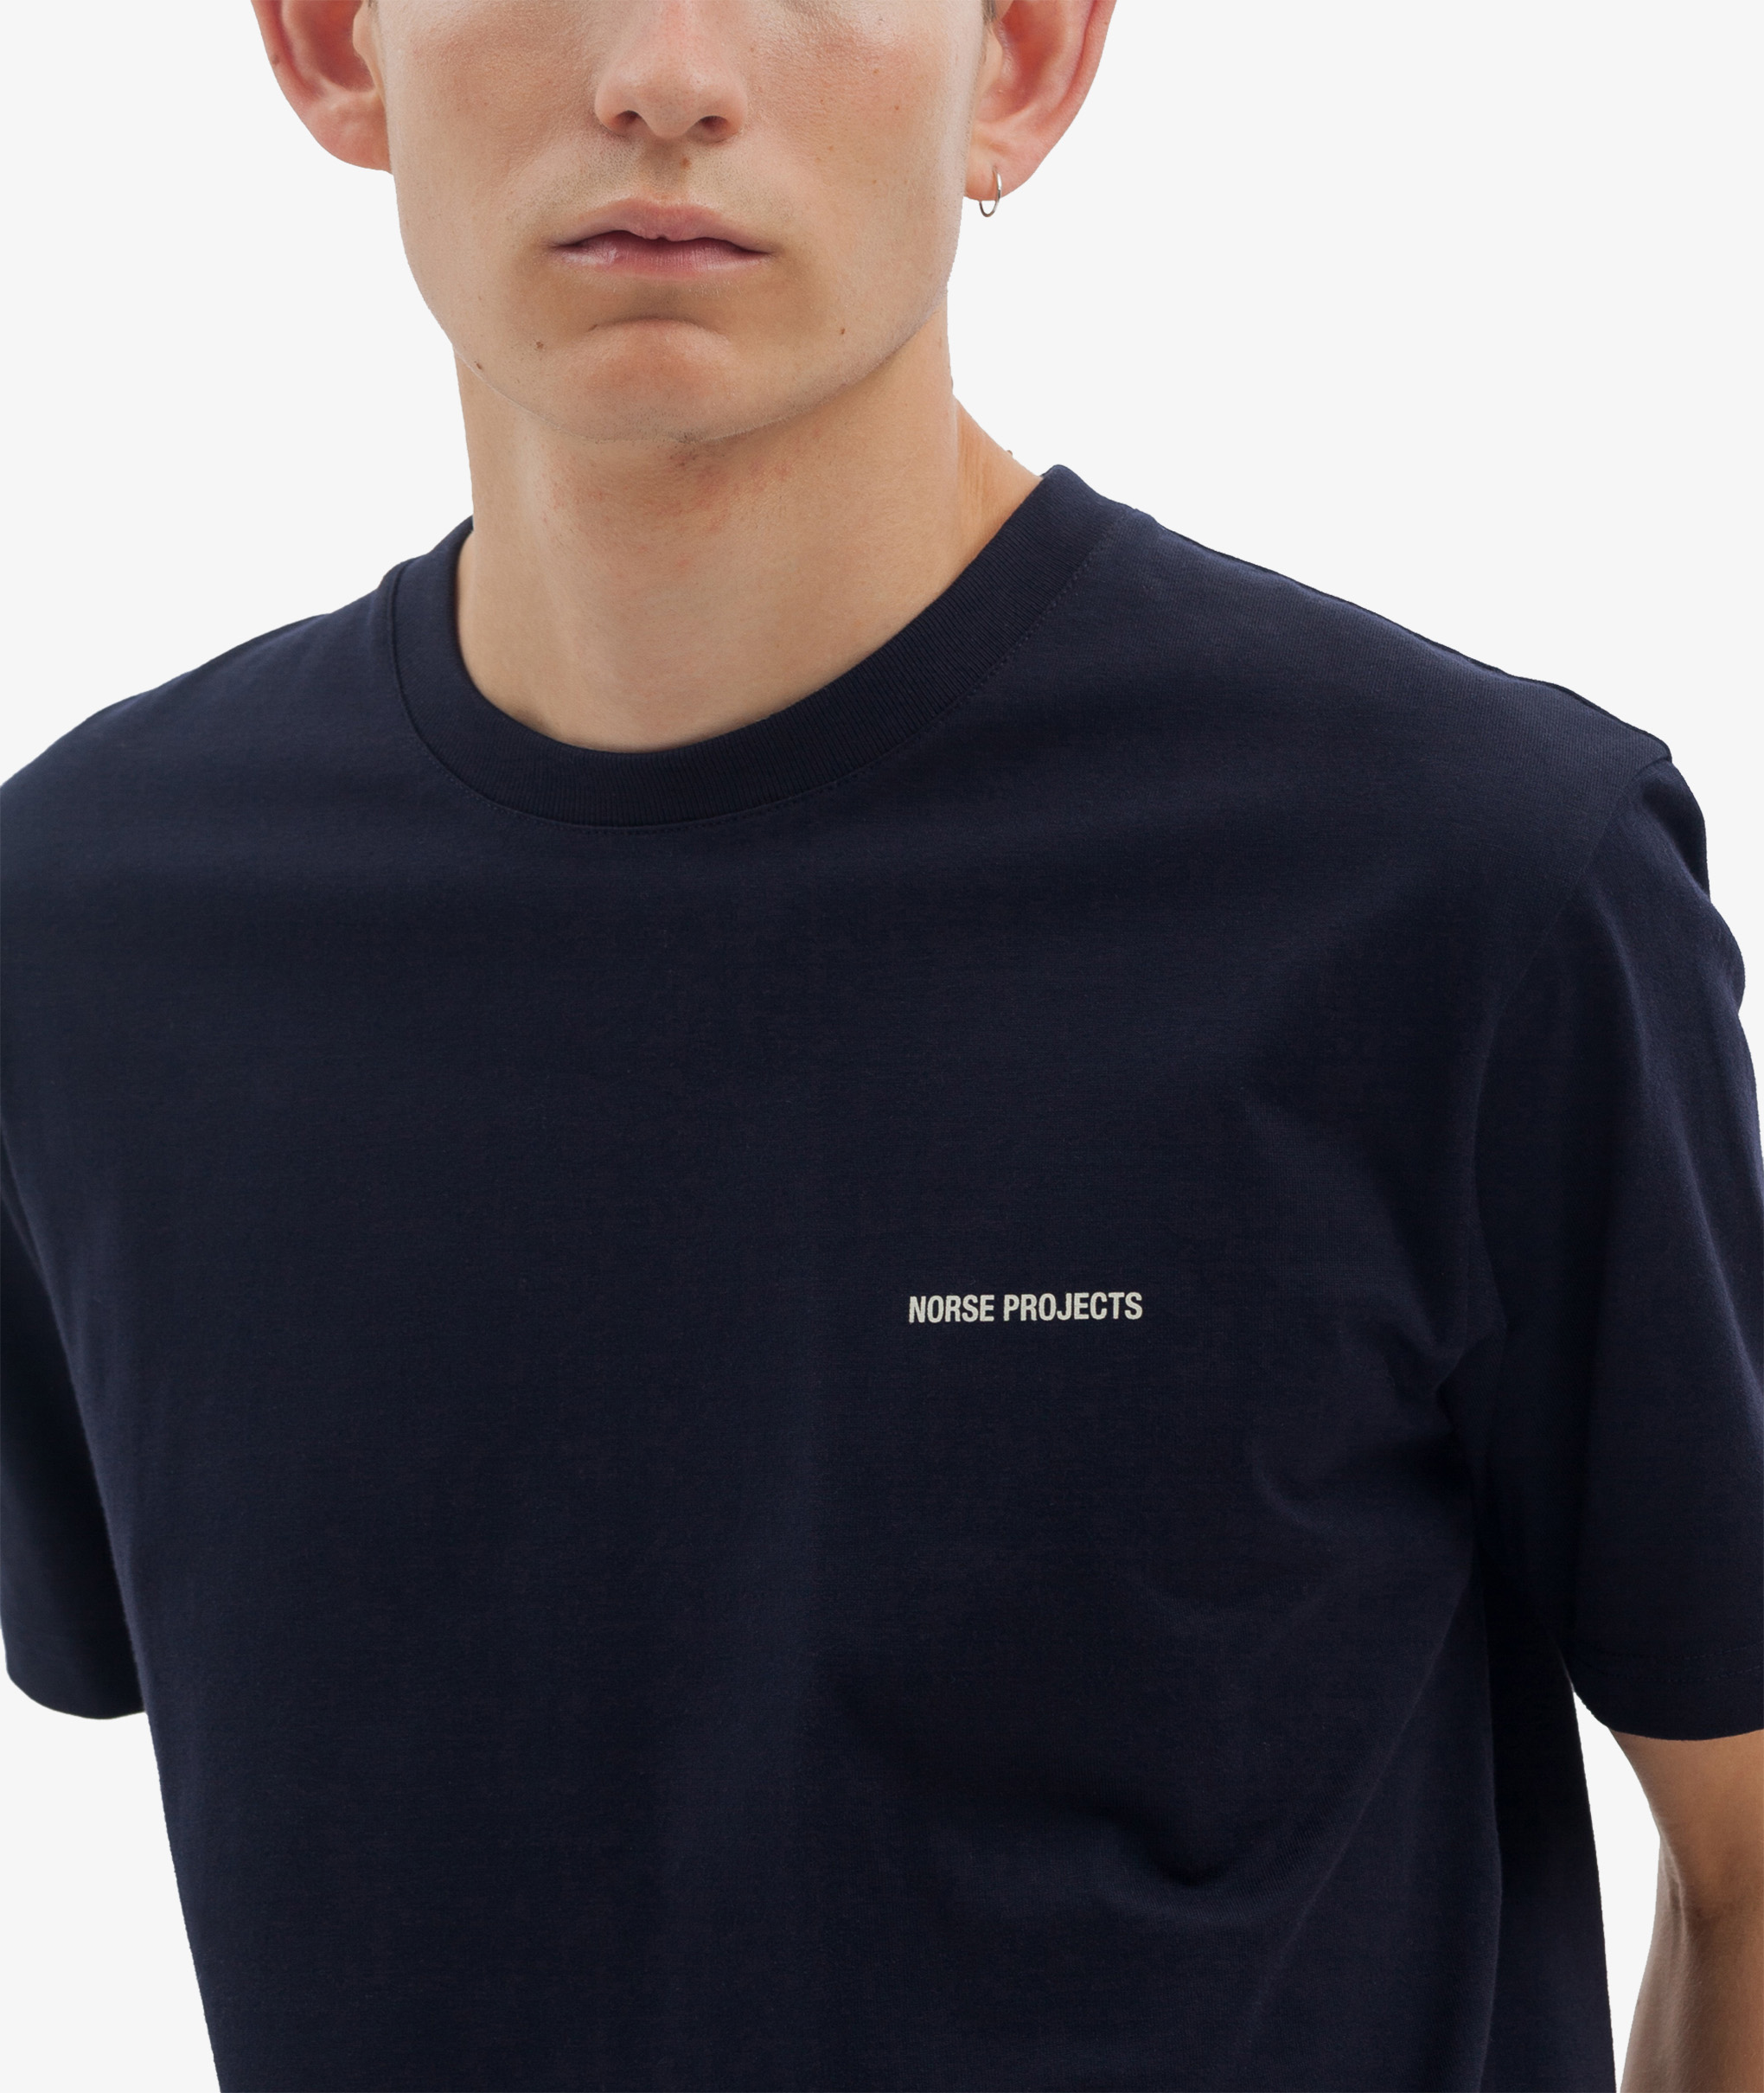 Norse Store | Shipping Worldwide - Norse Projects Johannes Standard Logo